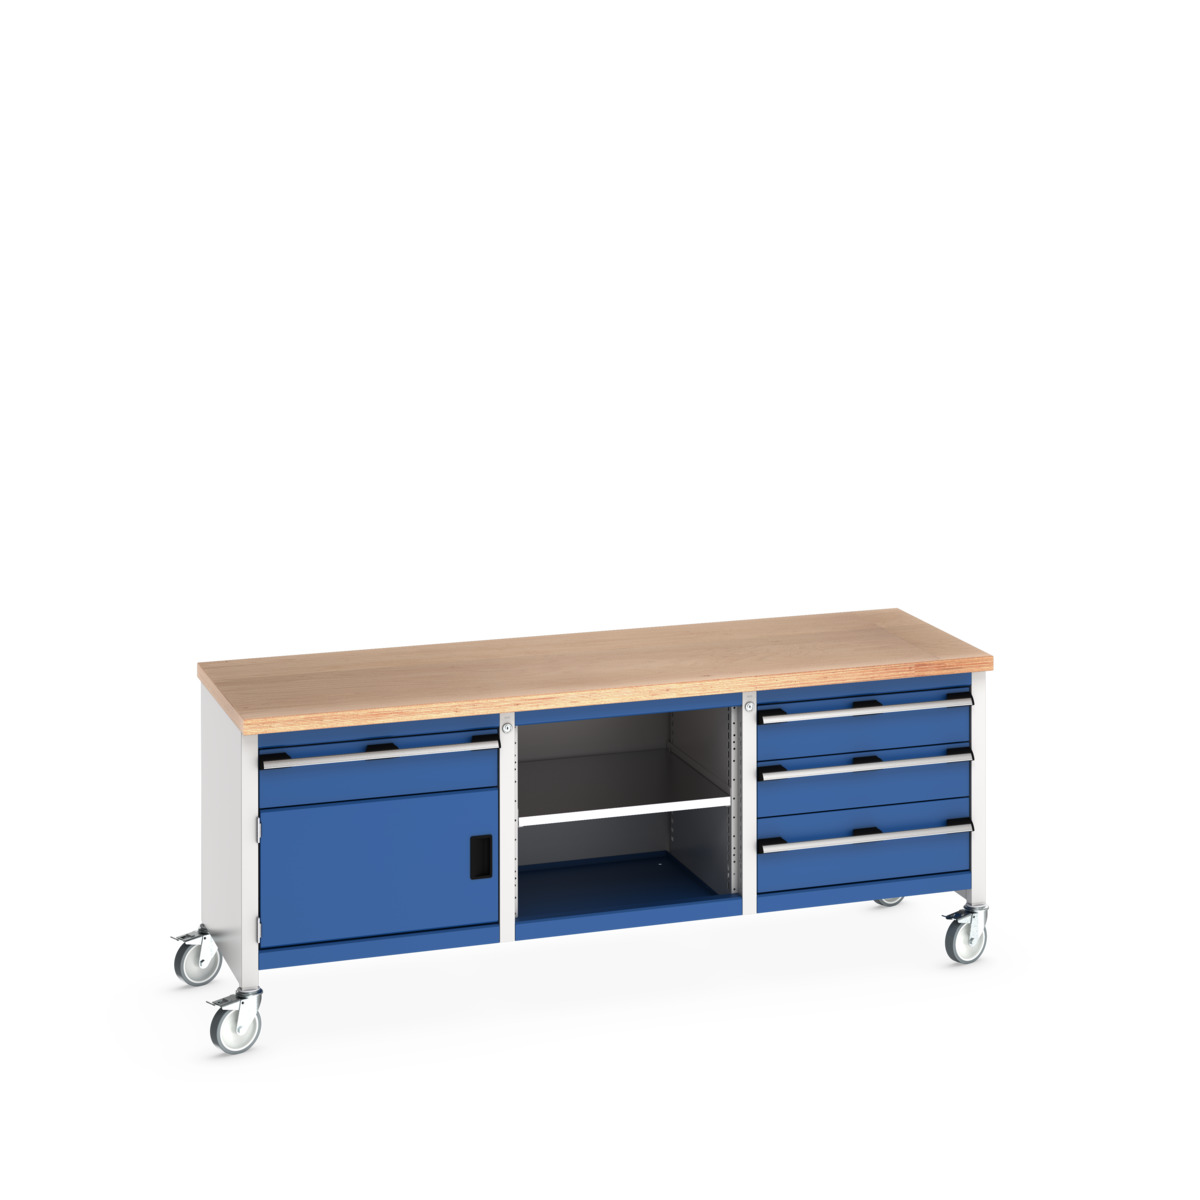 41002127.11V - cubio mobile storage bench (mpx)